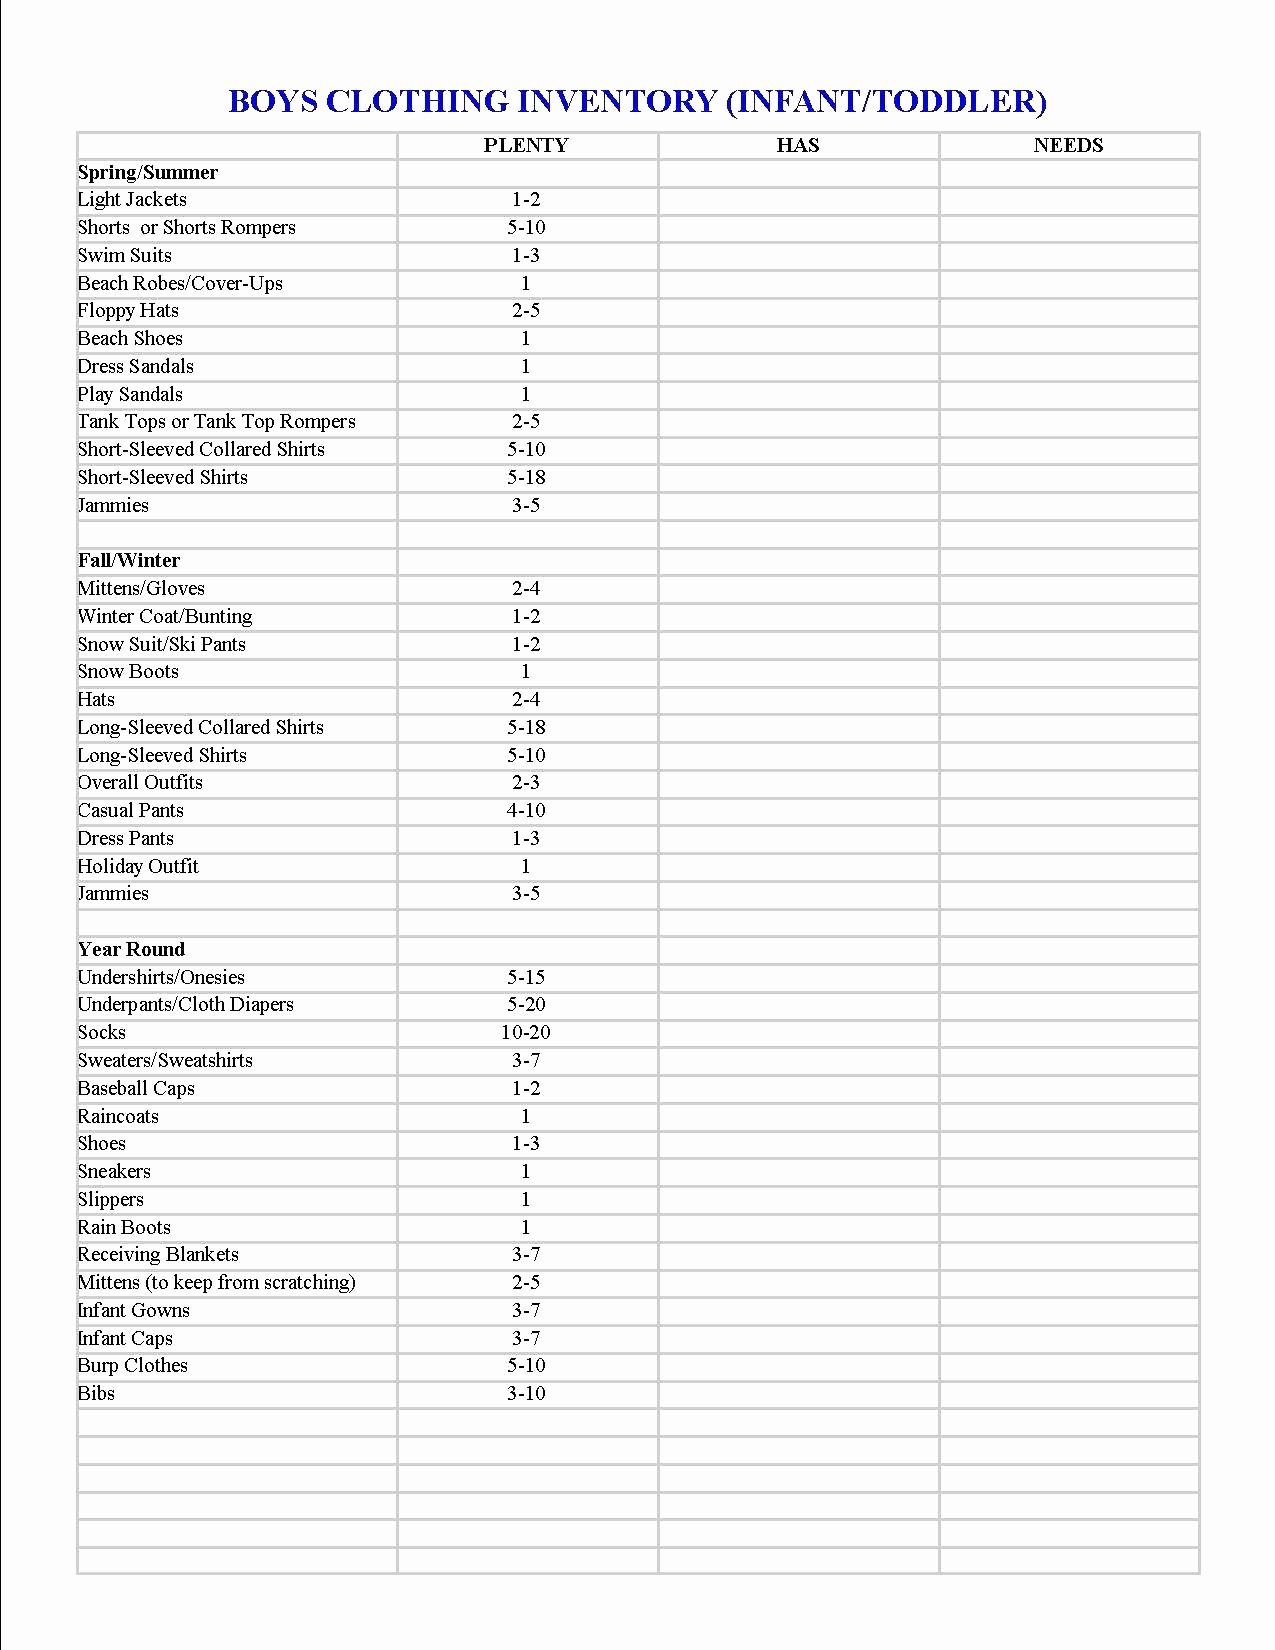 50 Awesome Goodwill Donation Values Worksheet DOCUMENTS IDEAS Document